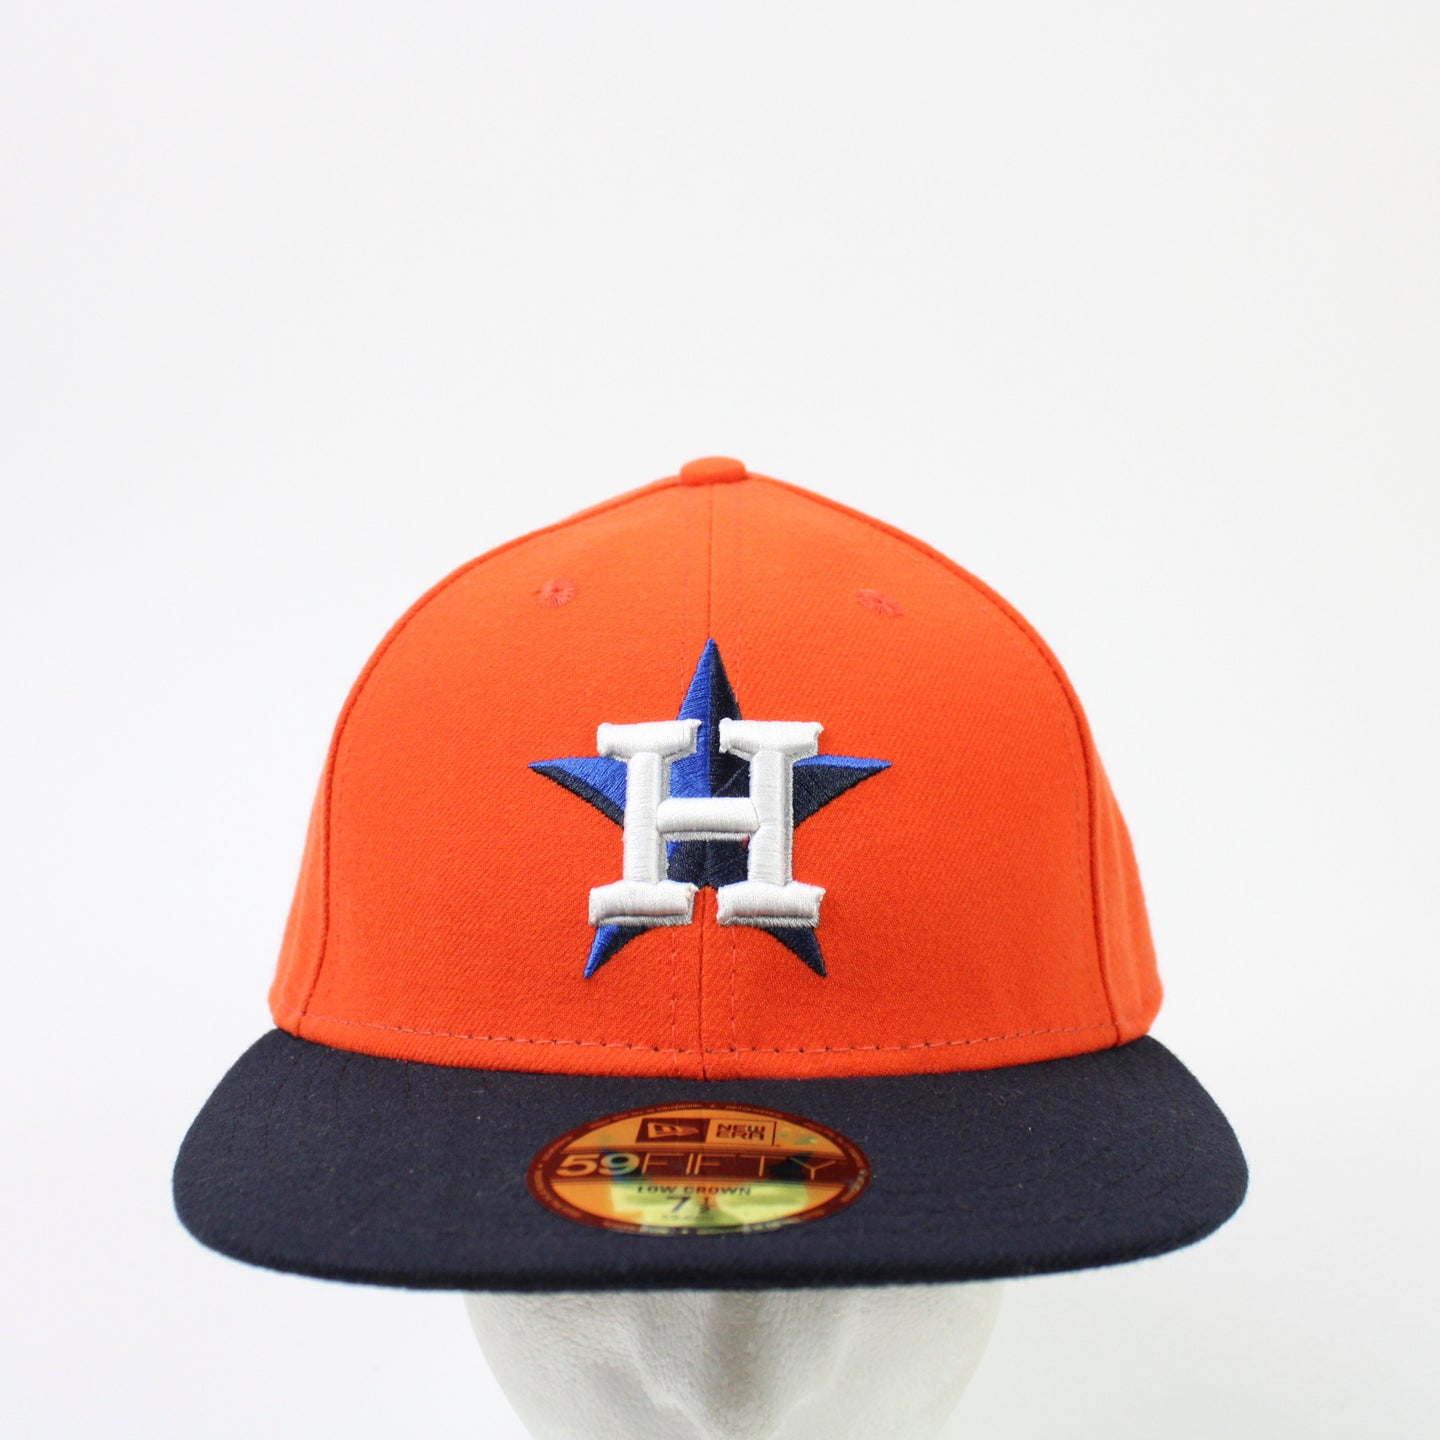 Men's Mitchell & Ness Navy/Orange Houston Astros Bases Loaded Fitted Hat